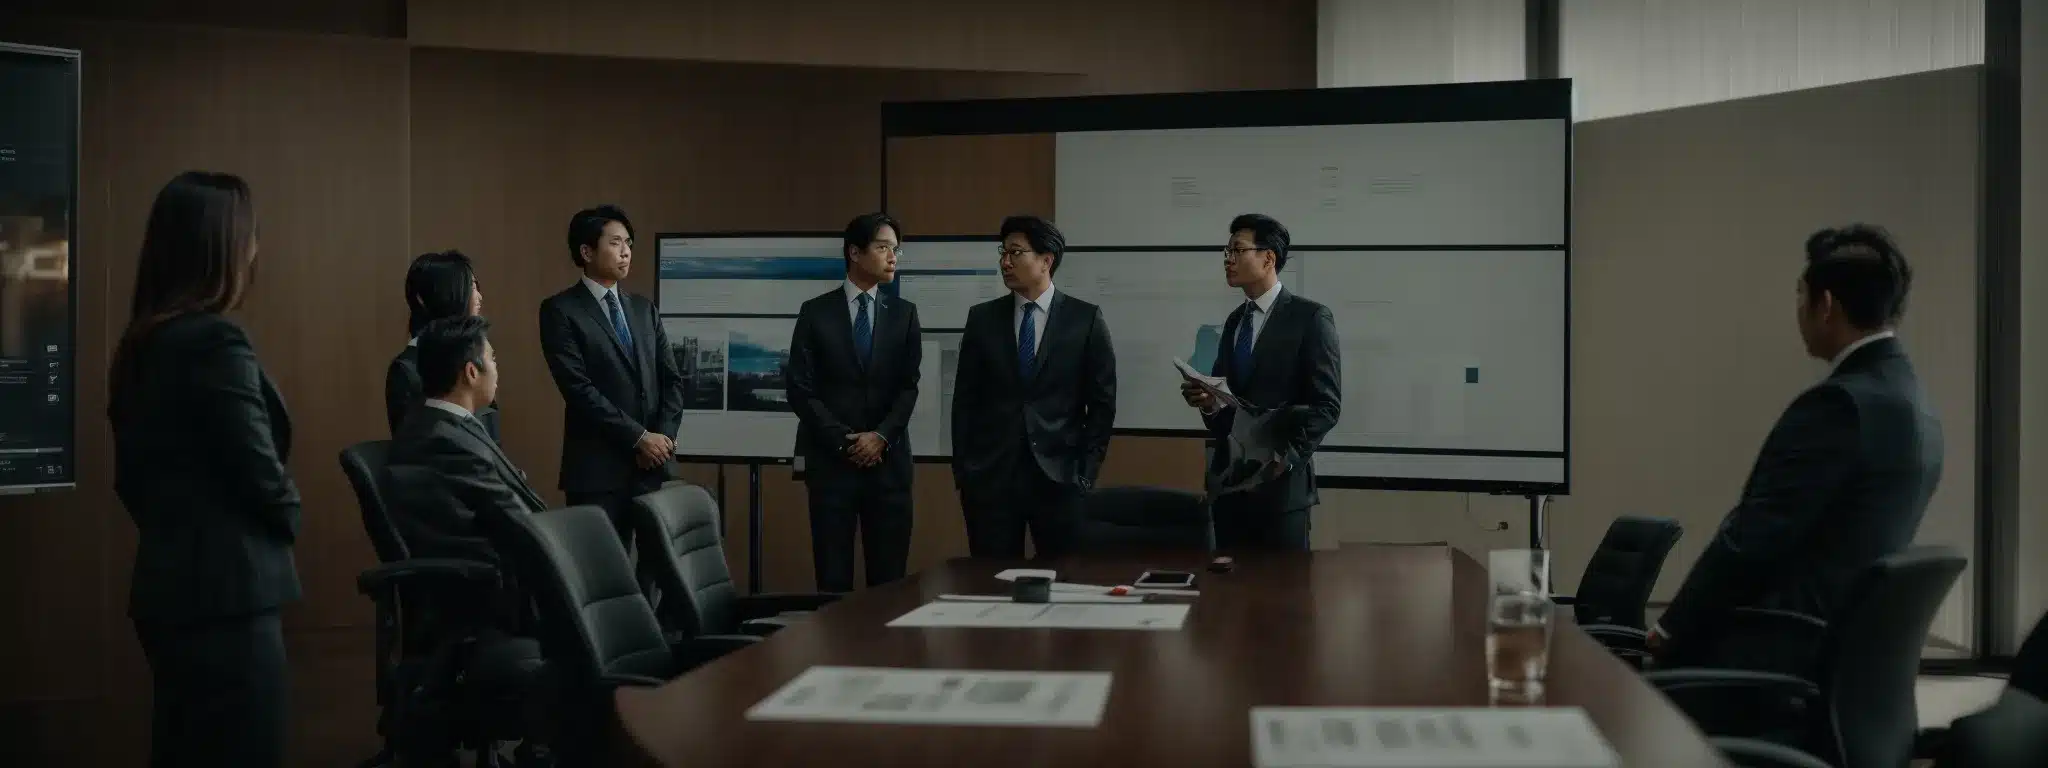 A Board Room With Marketing Professionals Contemplating Over A Brand'S Visual Model Displayed On A Screen.